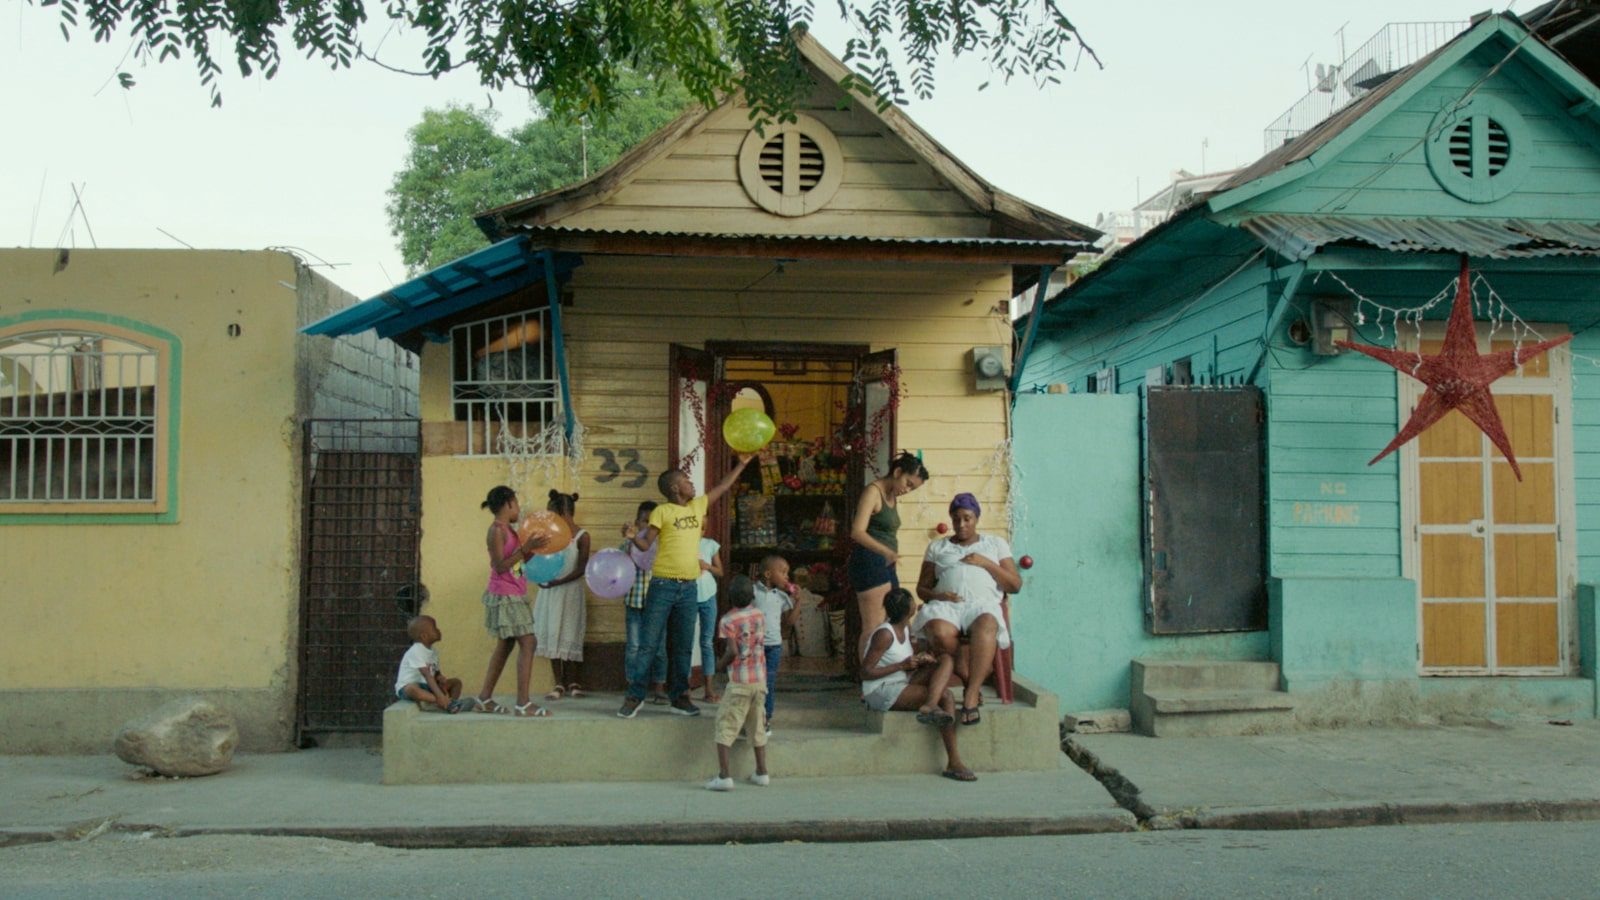 Children playing with balloons in front of a house.